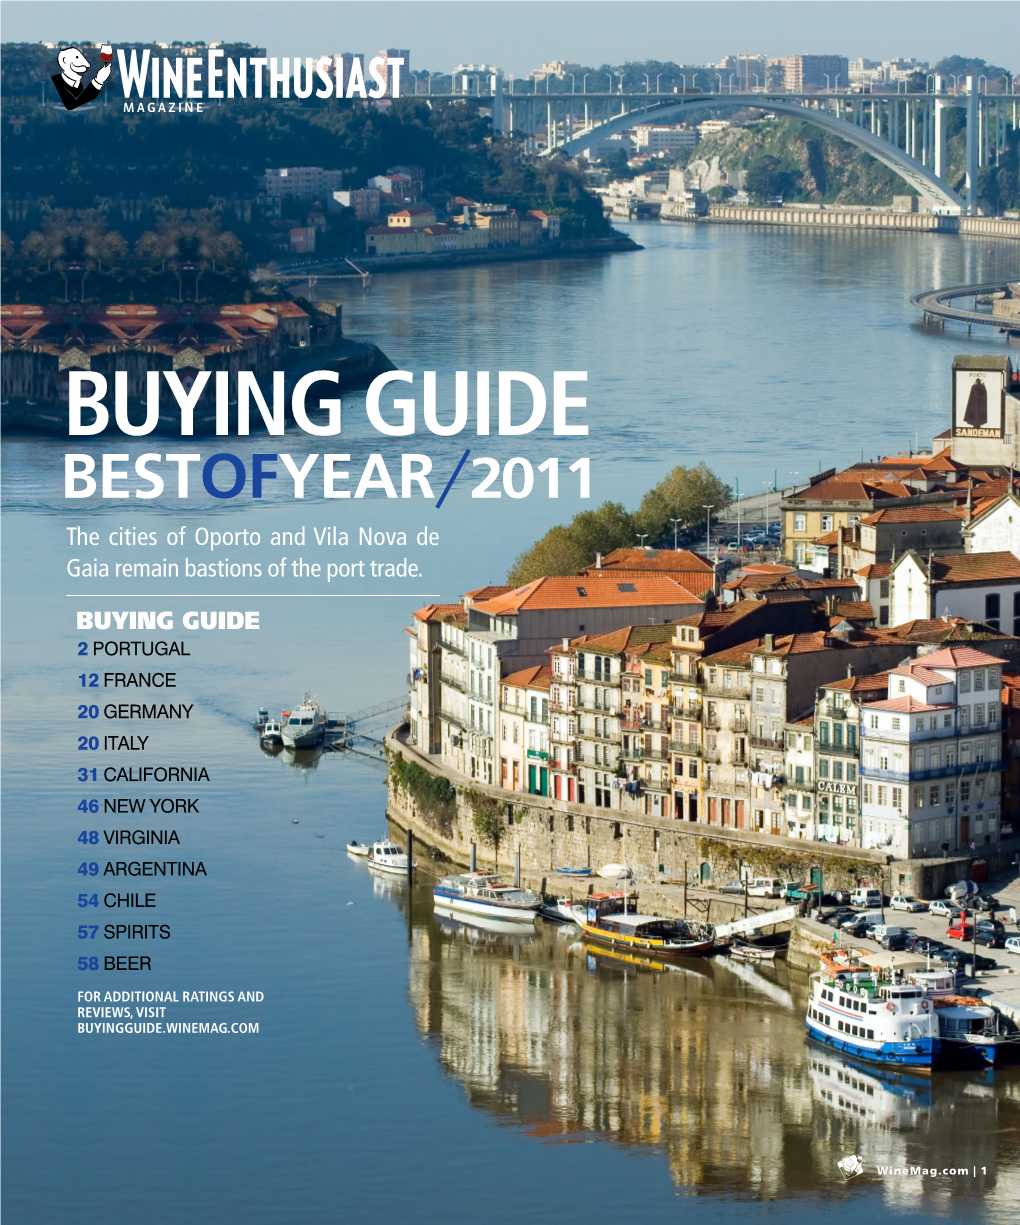 Buying Guide Bestofyear 2011 the Cities of Oporto and Vila Nova De Gaia Remain Bastions of the Port Trade